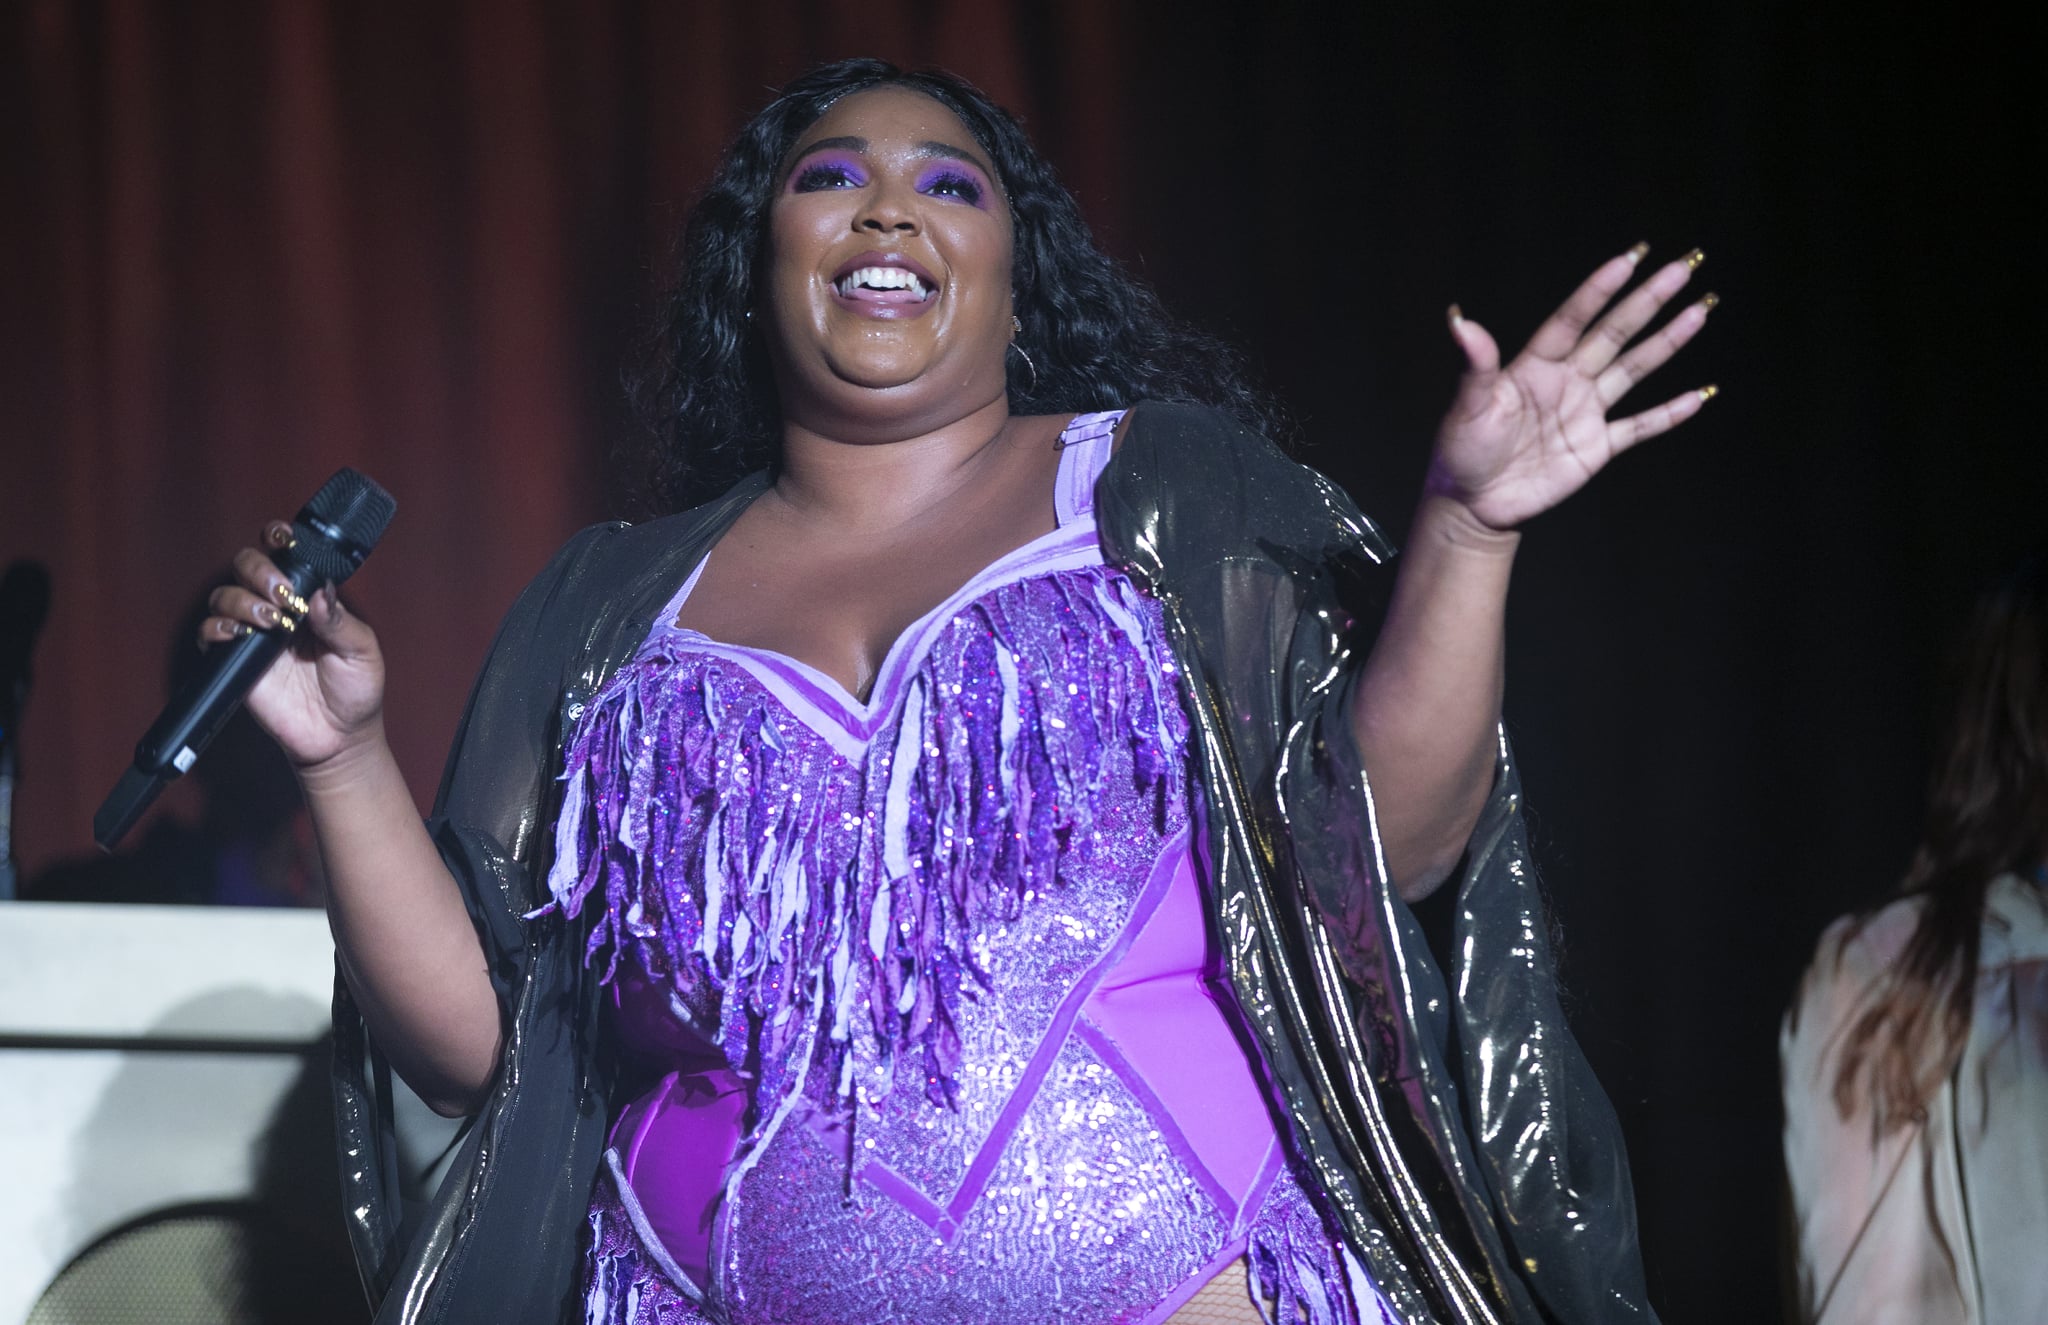 CHARLOTTE, NORTH CAROLINA - SEPTEMBER 15: Singer Lizzo performs at Charlotte Metro Credit Union Amphitheatre on September 15, 2019 in Charlotte, North Carolina. (Photo by Jeff Hahne/Getty Images)